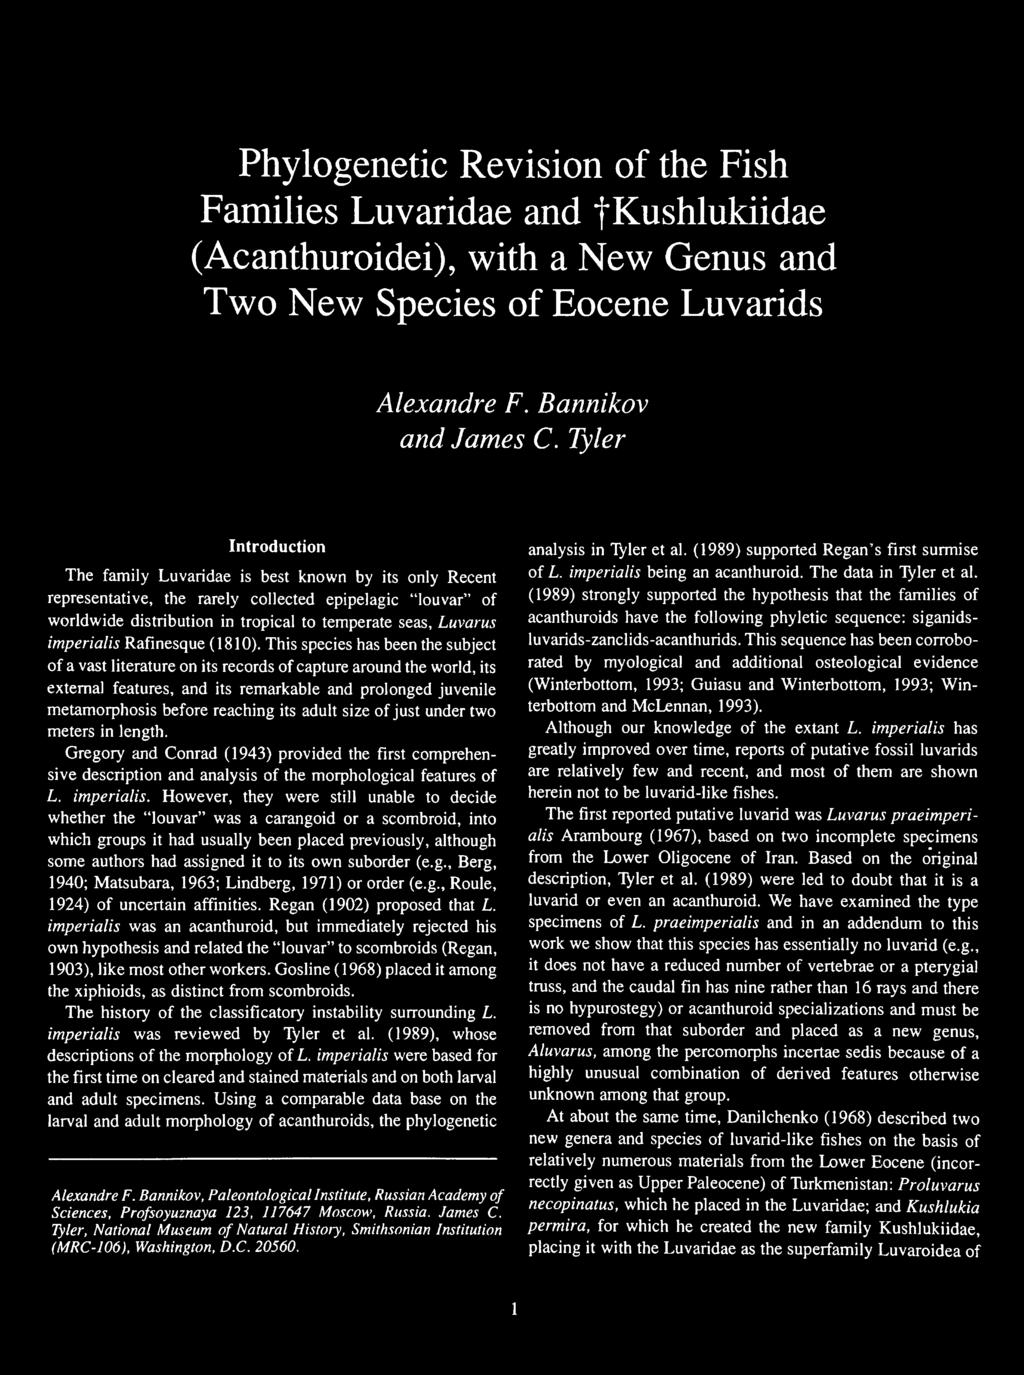 representative, the rarely collected epipelagic "louvar" of (1989) strongly supported the hypothesis that the families of worldwide distribution in tropical to temperate seas, Luvarus acanthuroids